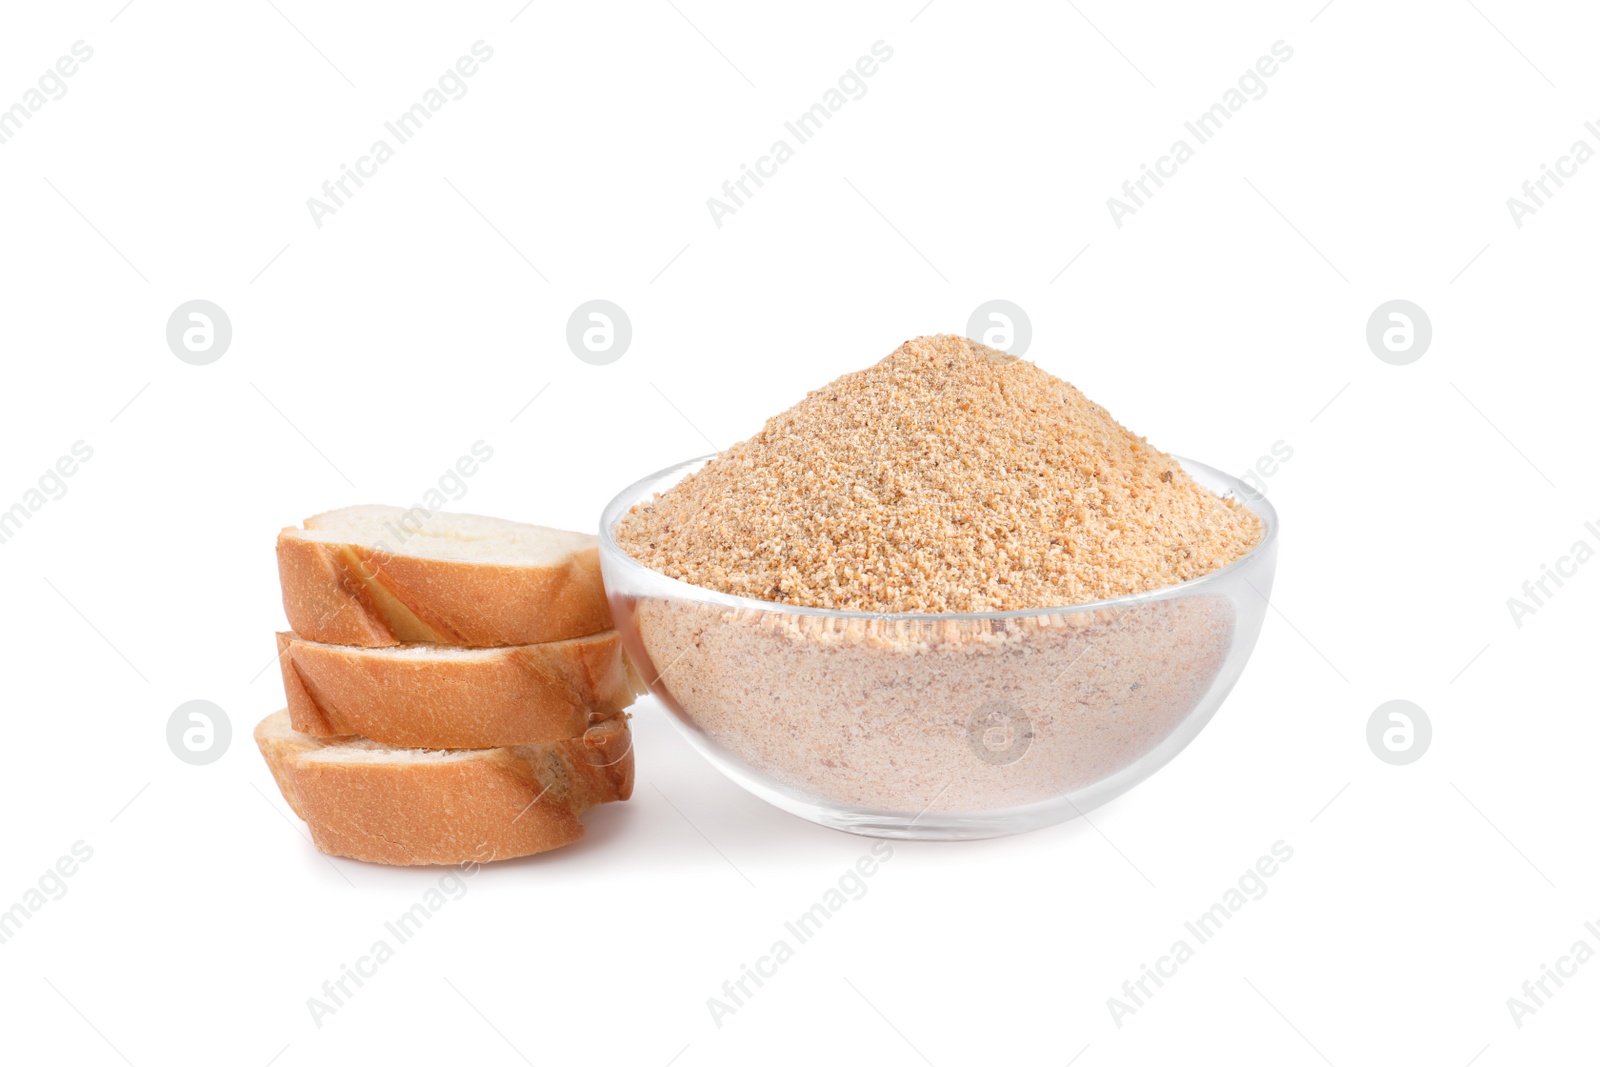 Photo of Fresh bread crumbs in glass bowl and slices of loaf on white background